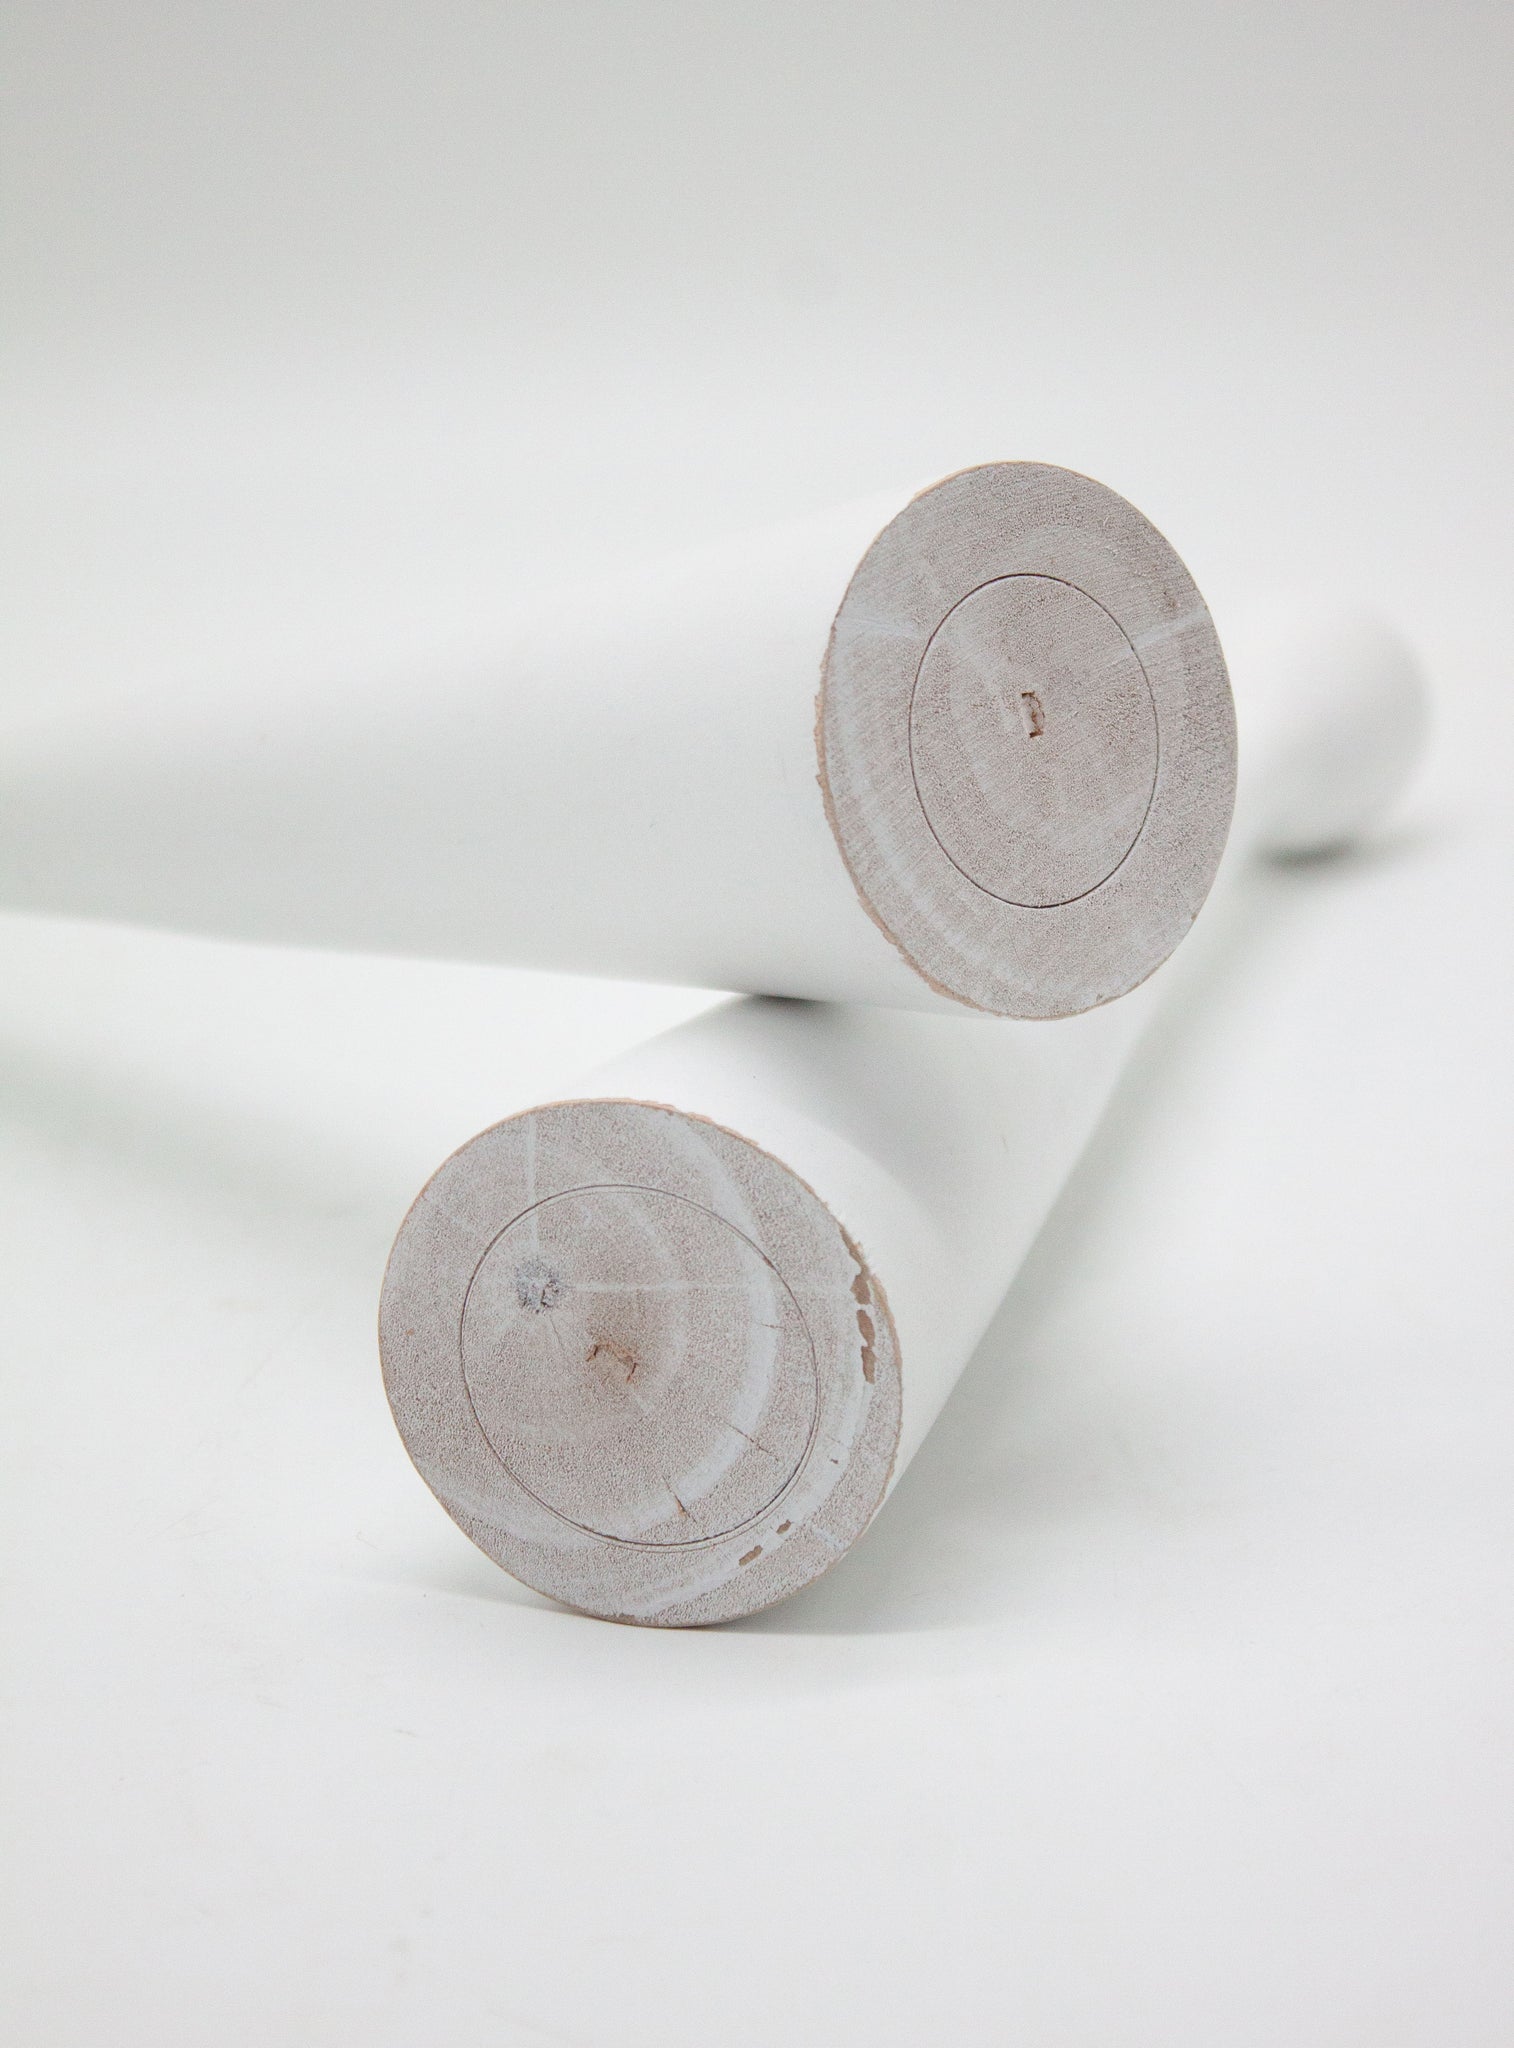 Danish Turned Wooden Candle Holders (White)